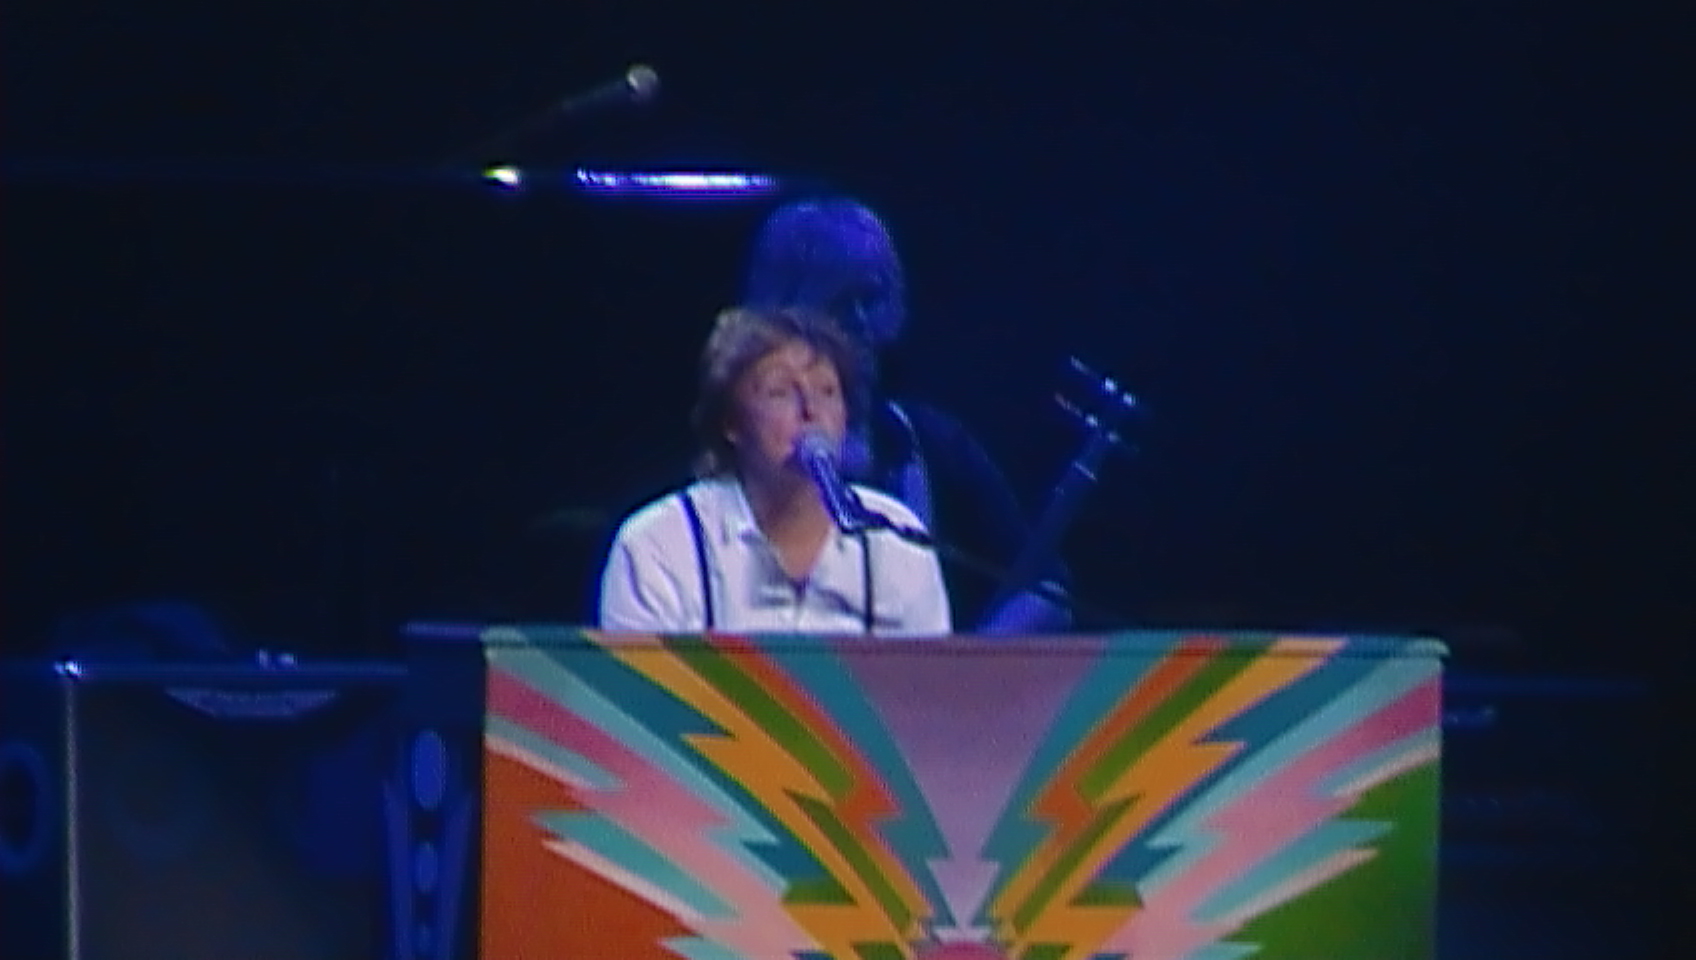 Paul, wearing his white dress shirt and black suspenders, playing his psychedelic upright piano during Hey Jude, the end of the proper set. Front view.